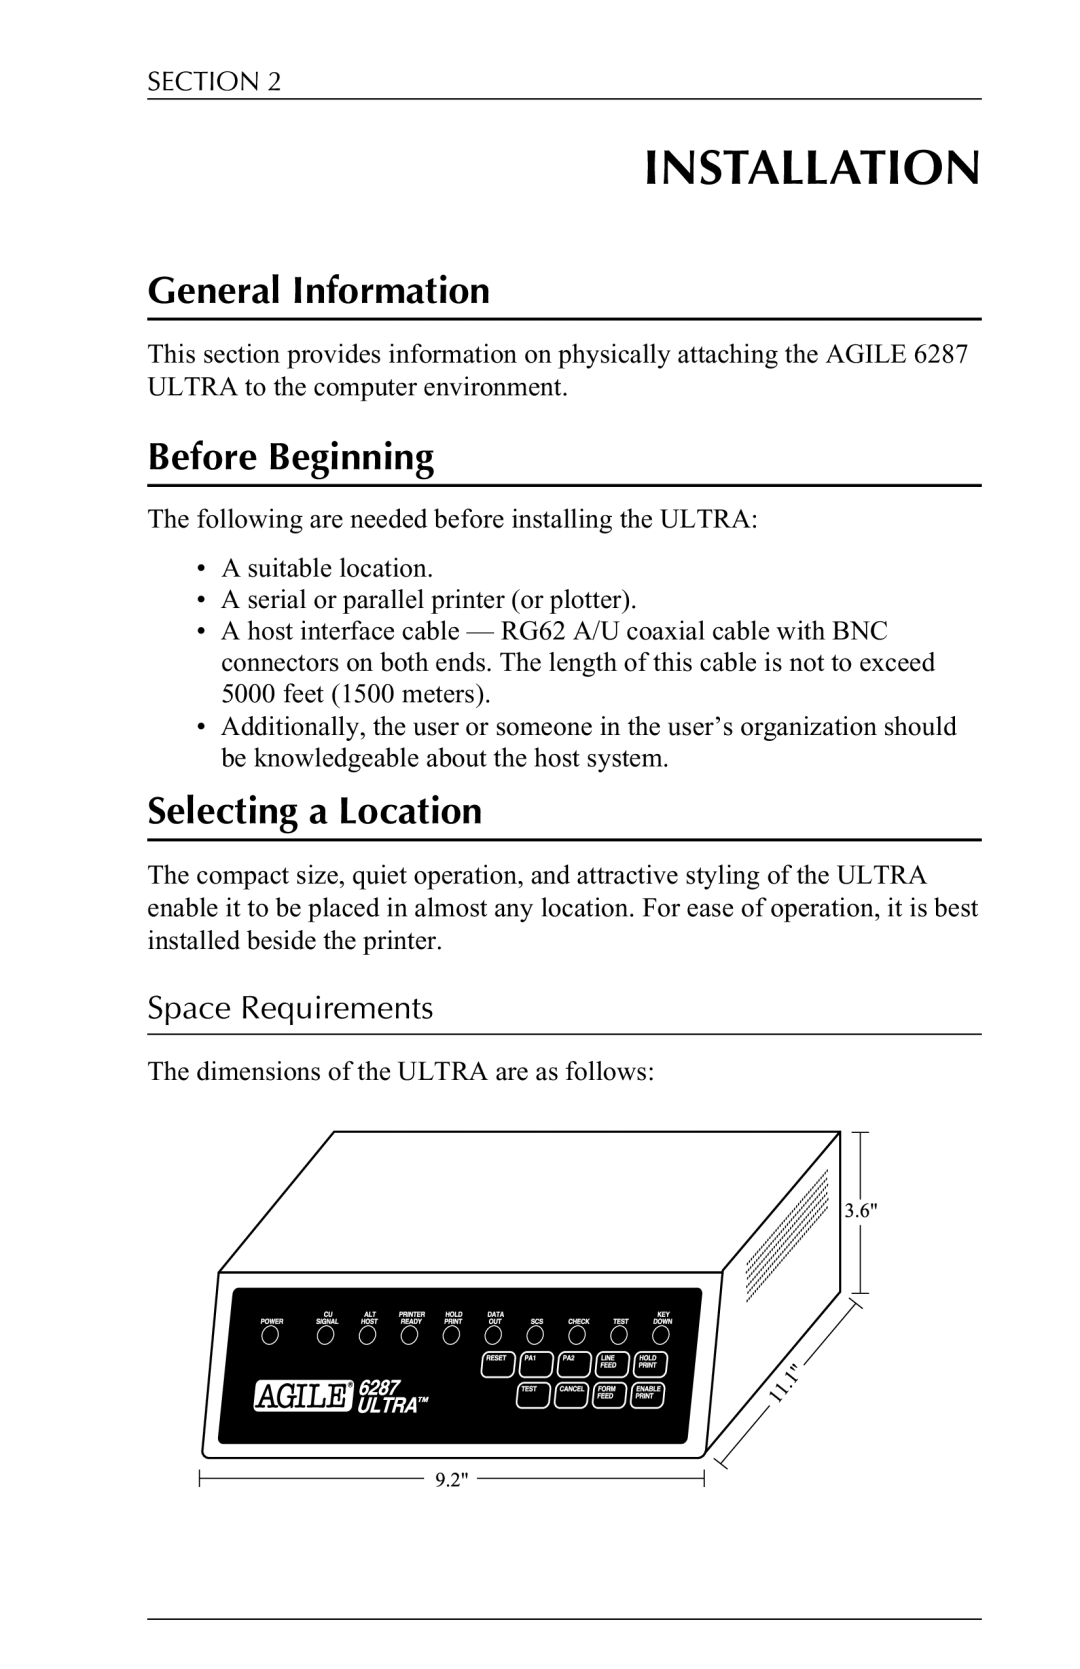 Agilent Technologies 6287 manual Installation, Before Beginning, Selecting a Location, Space Requirements 